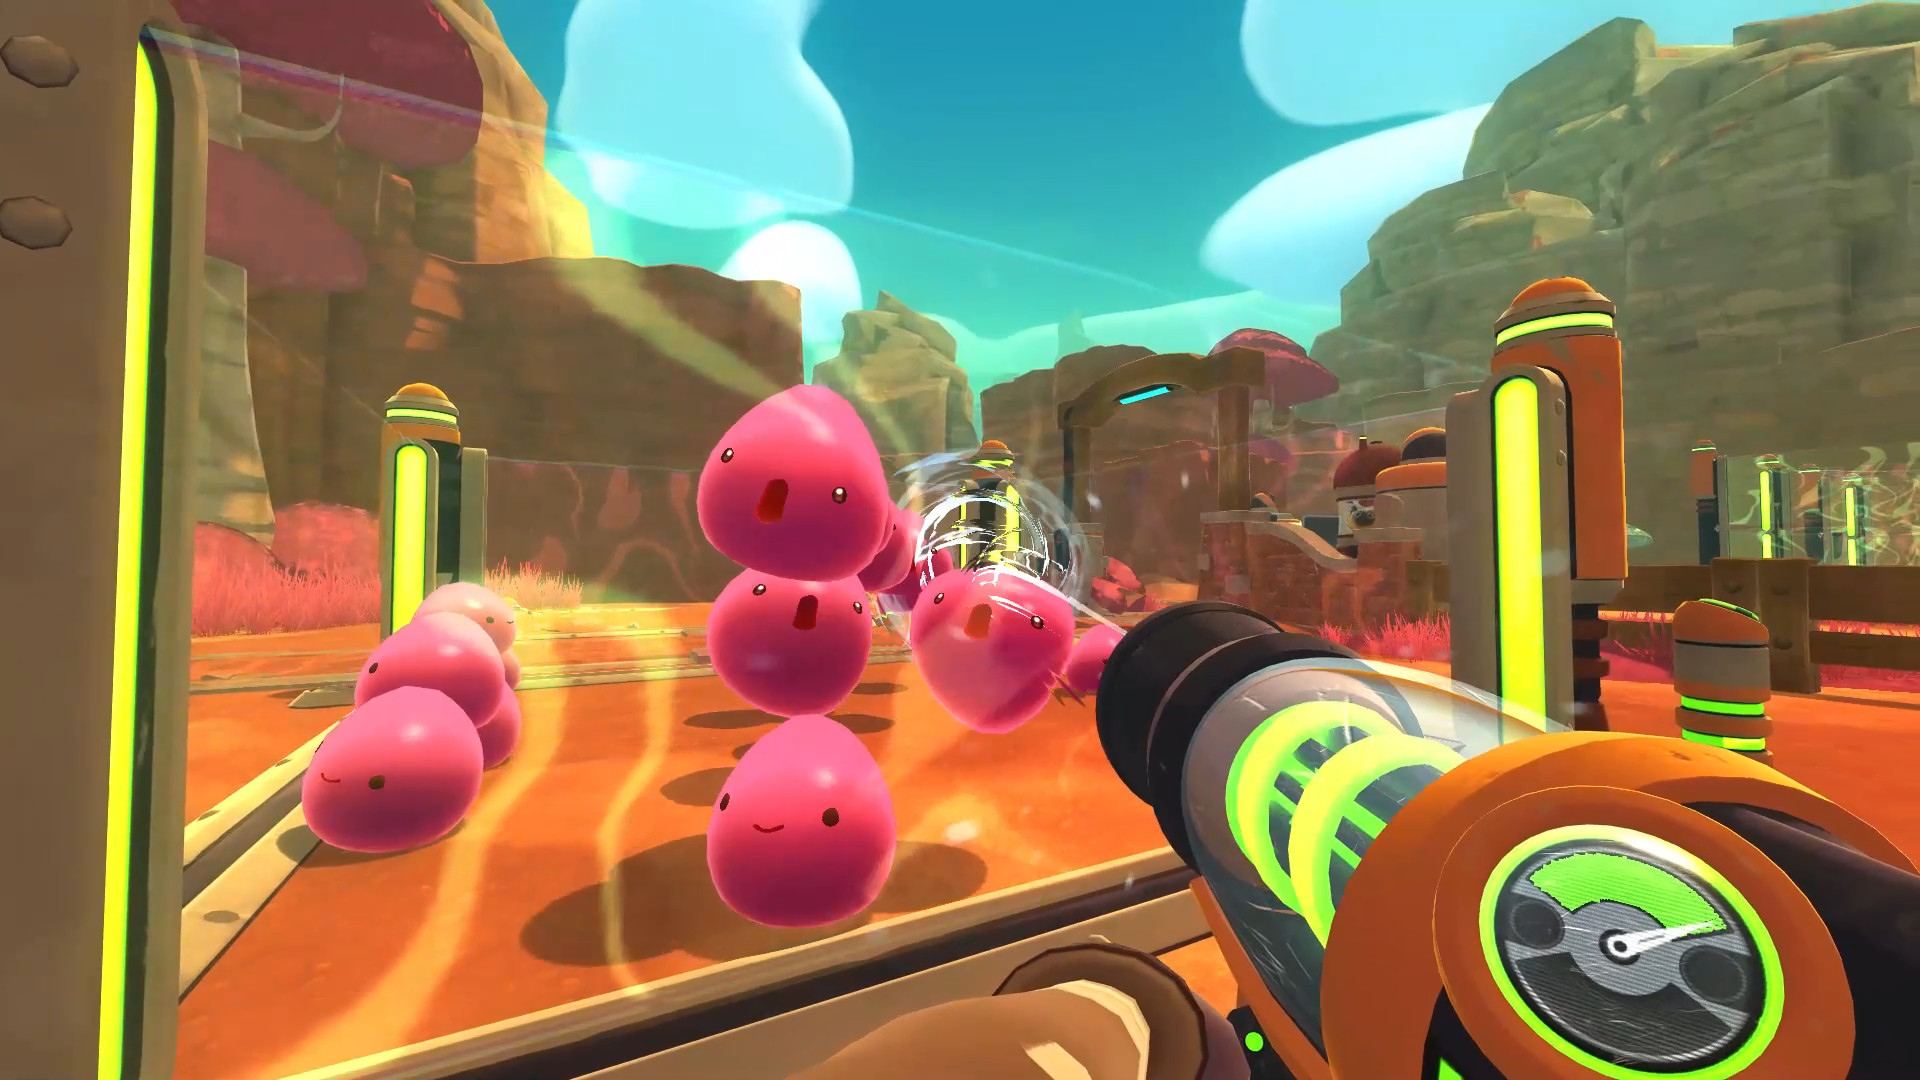 Playing Slime Rancher 1 Until I Have The Money To Buy The 2. - General  Gaming - LoversLab